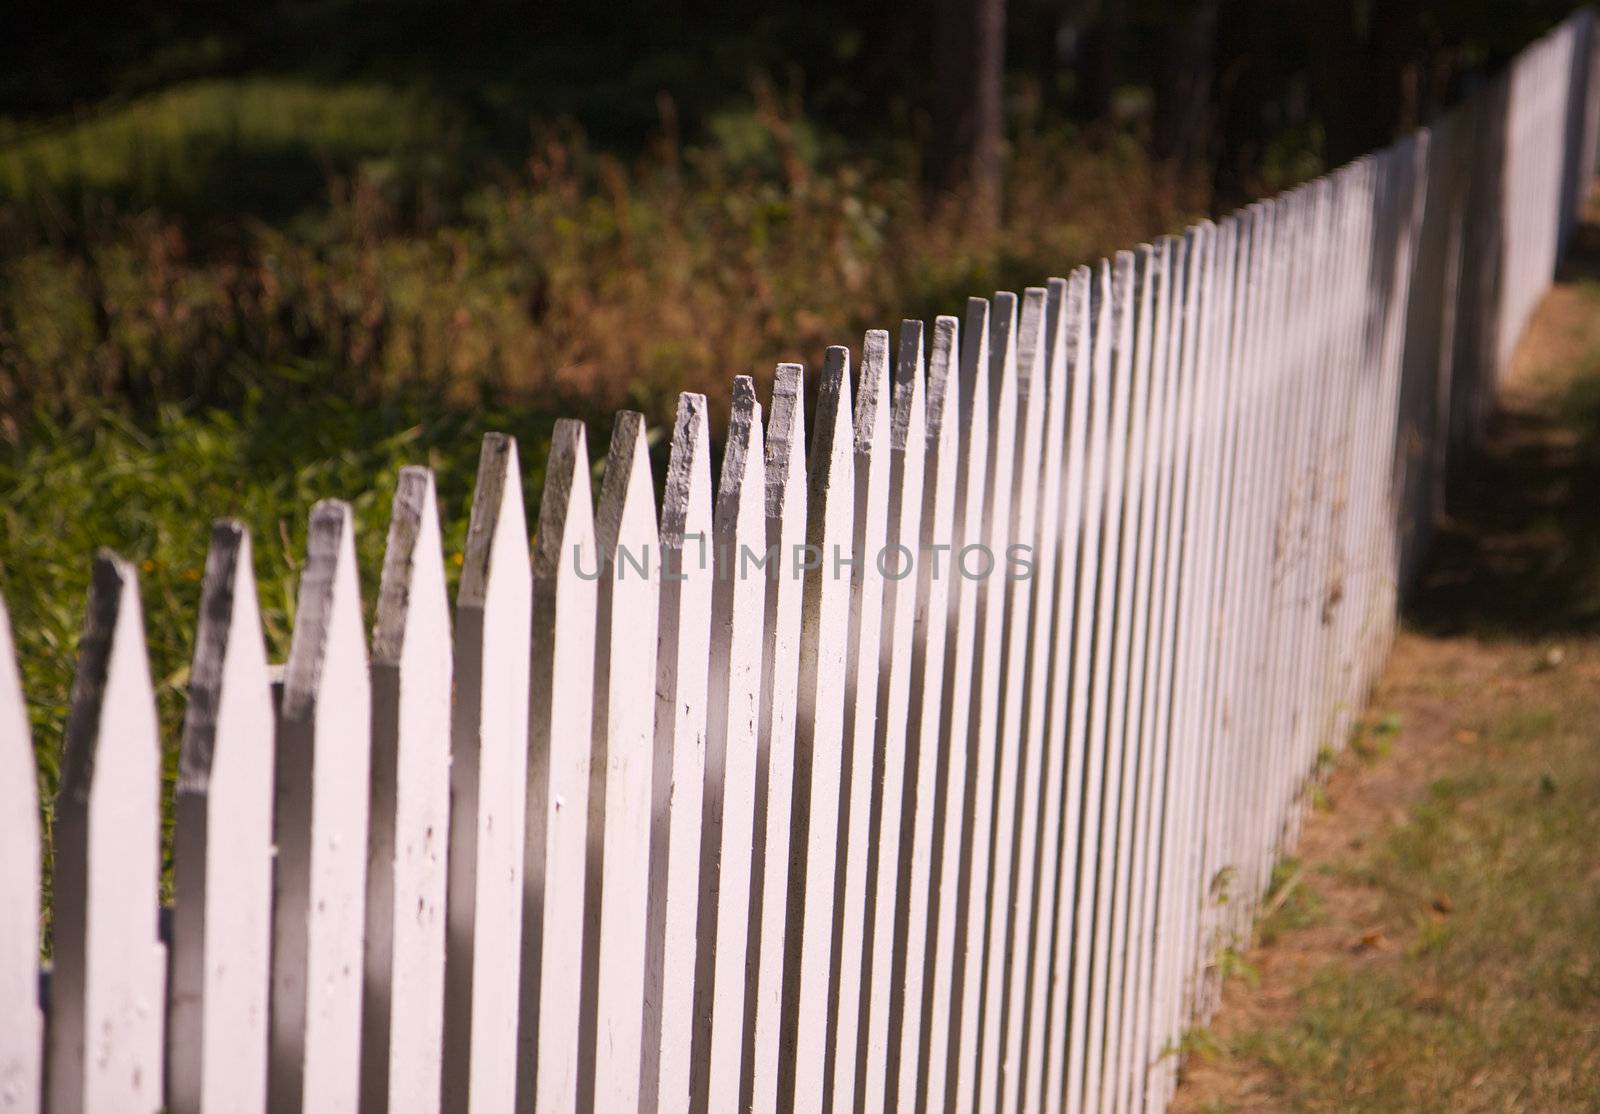 residential white picket fence diminishing in distance